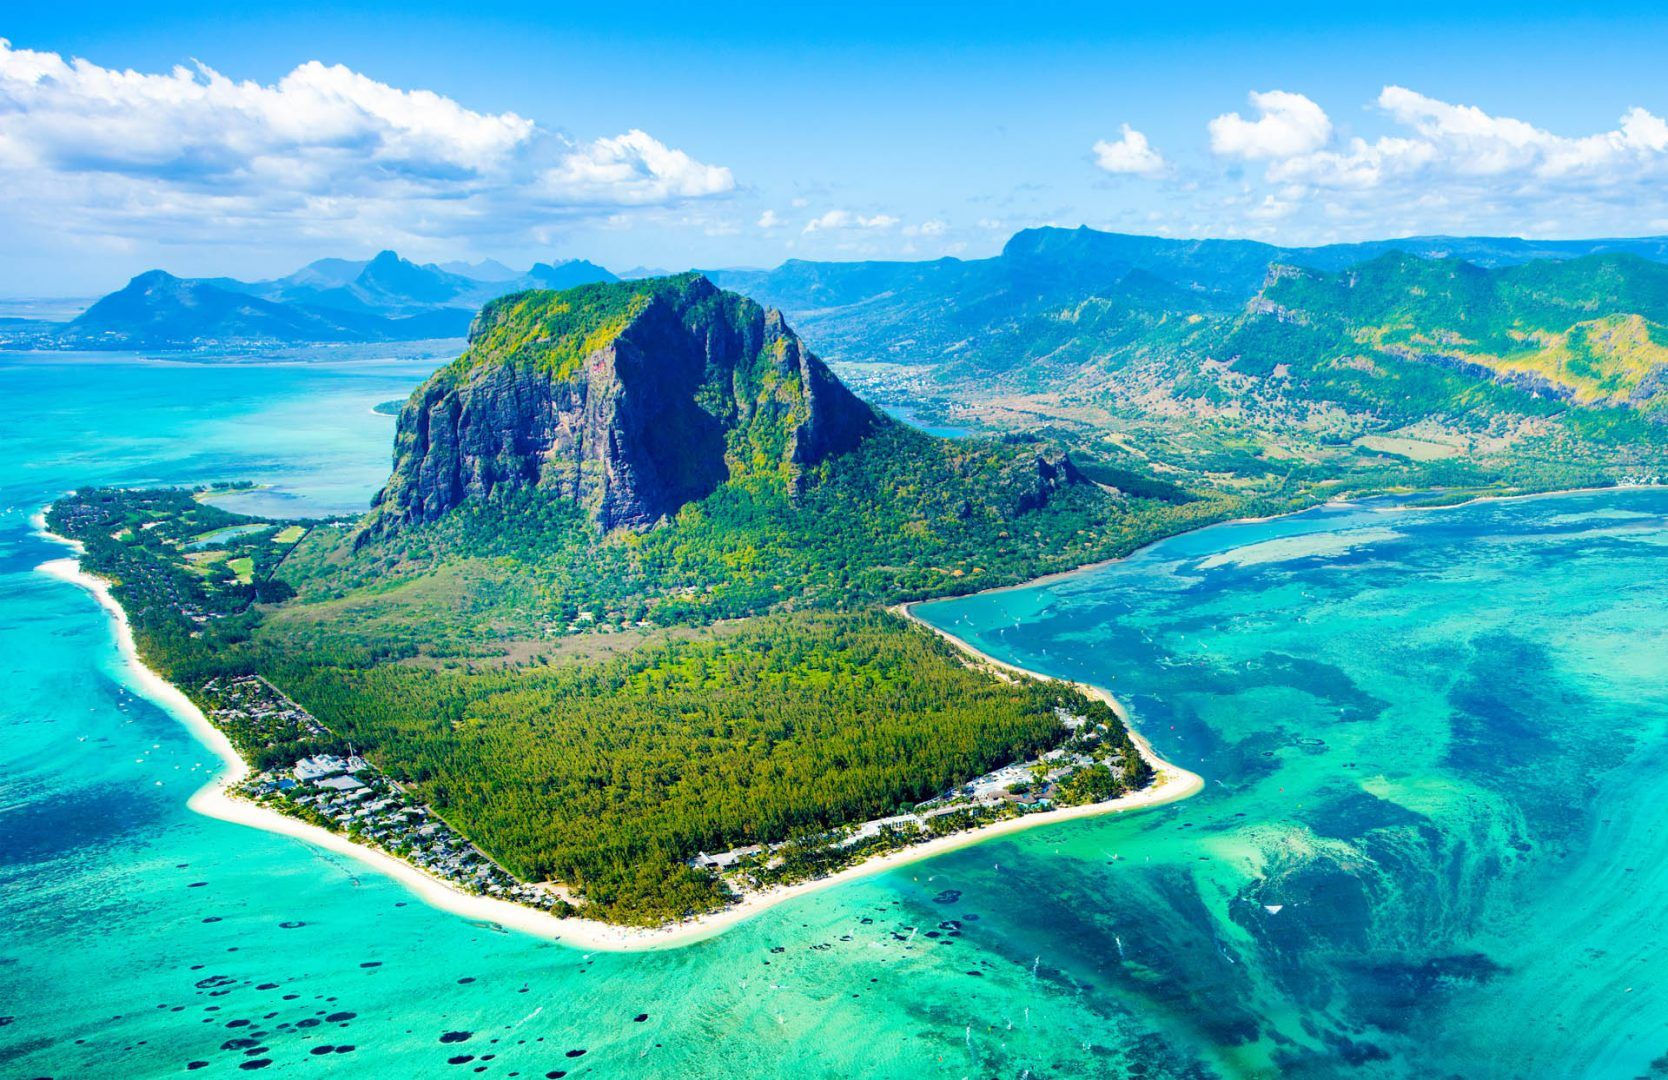 Things To Do In Mauritius - Experience This Wondrous Volcanic Island